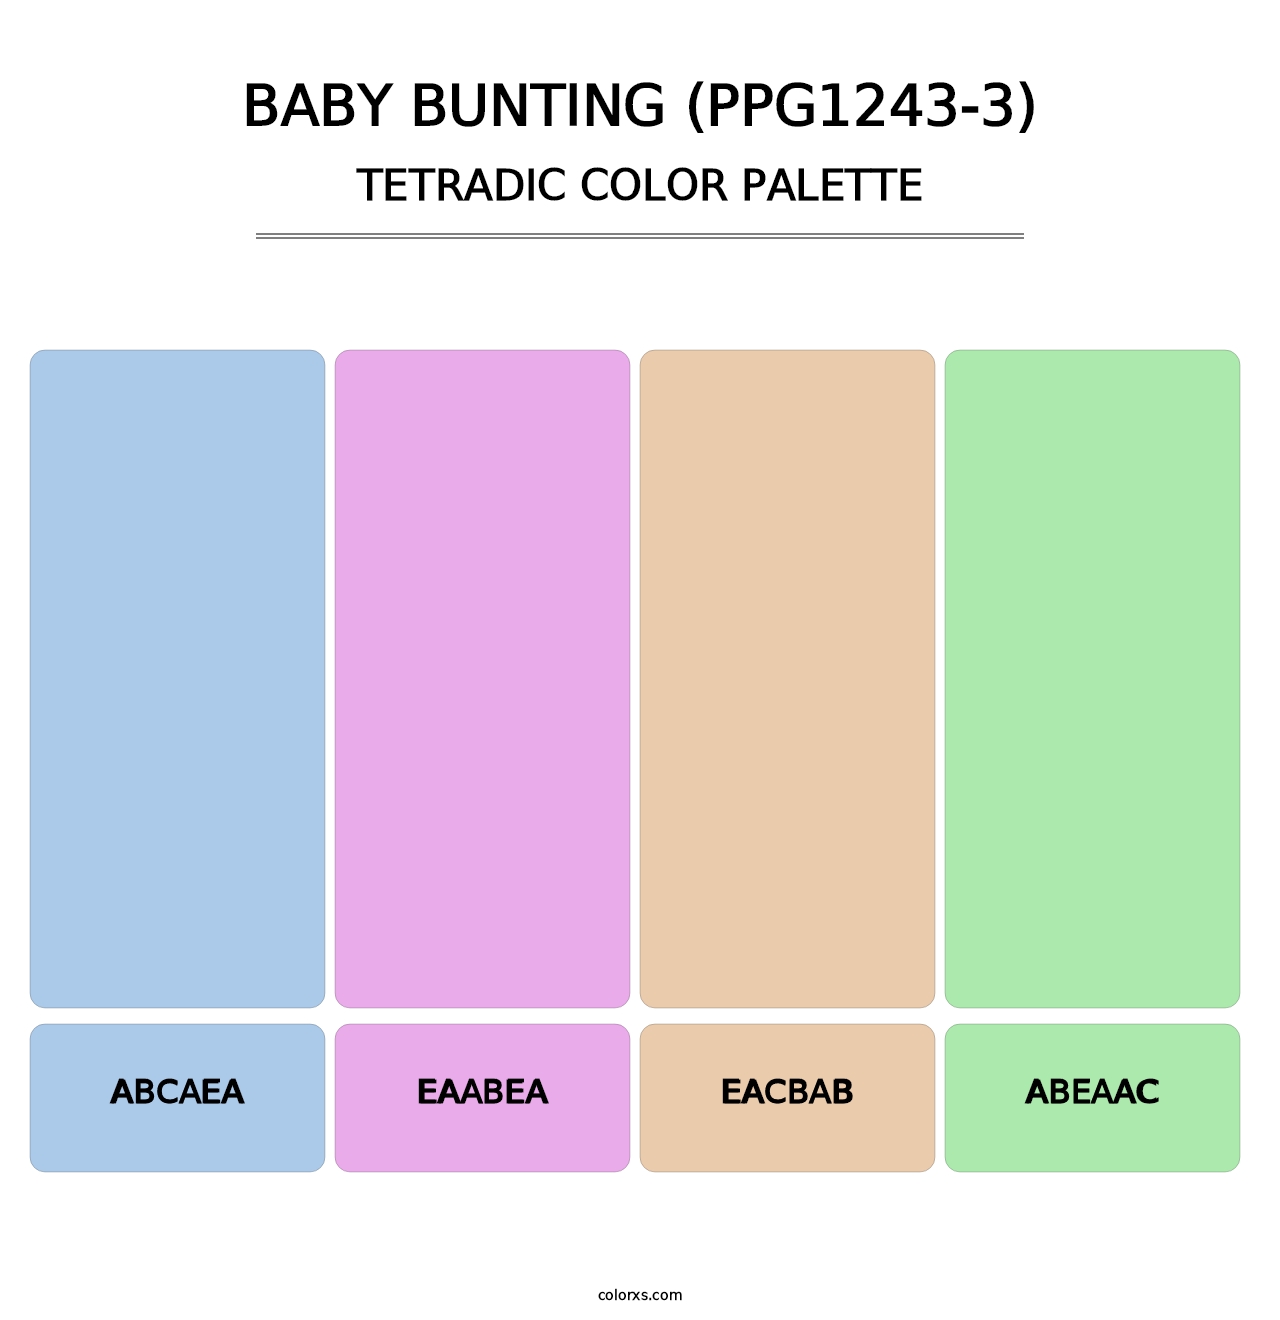 Baby Bunting (PPG1243-3) - Tetradic Color Palette